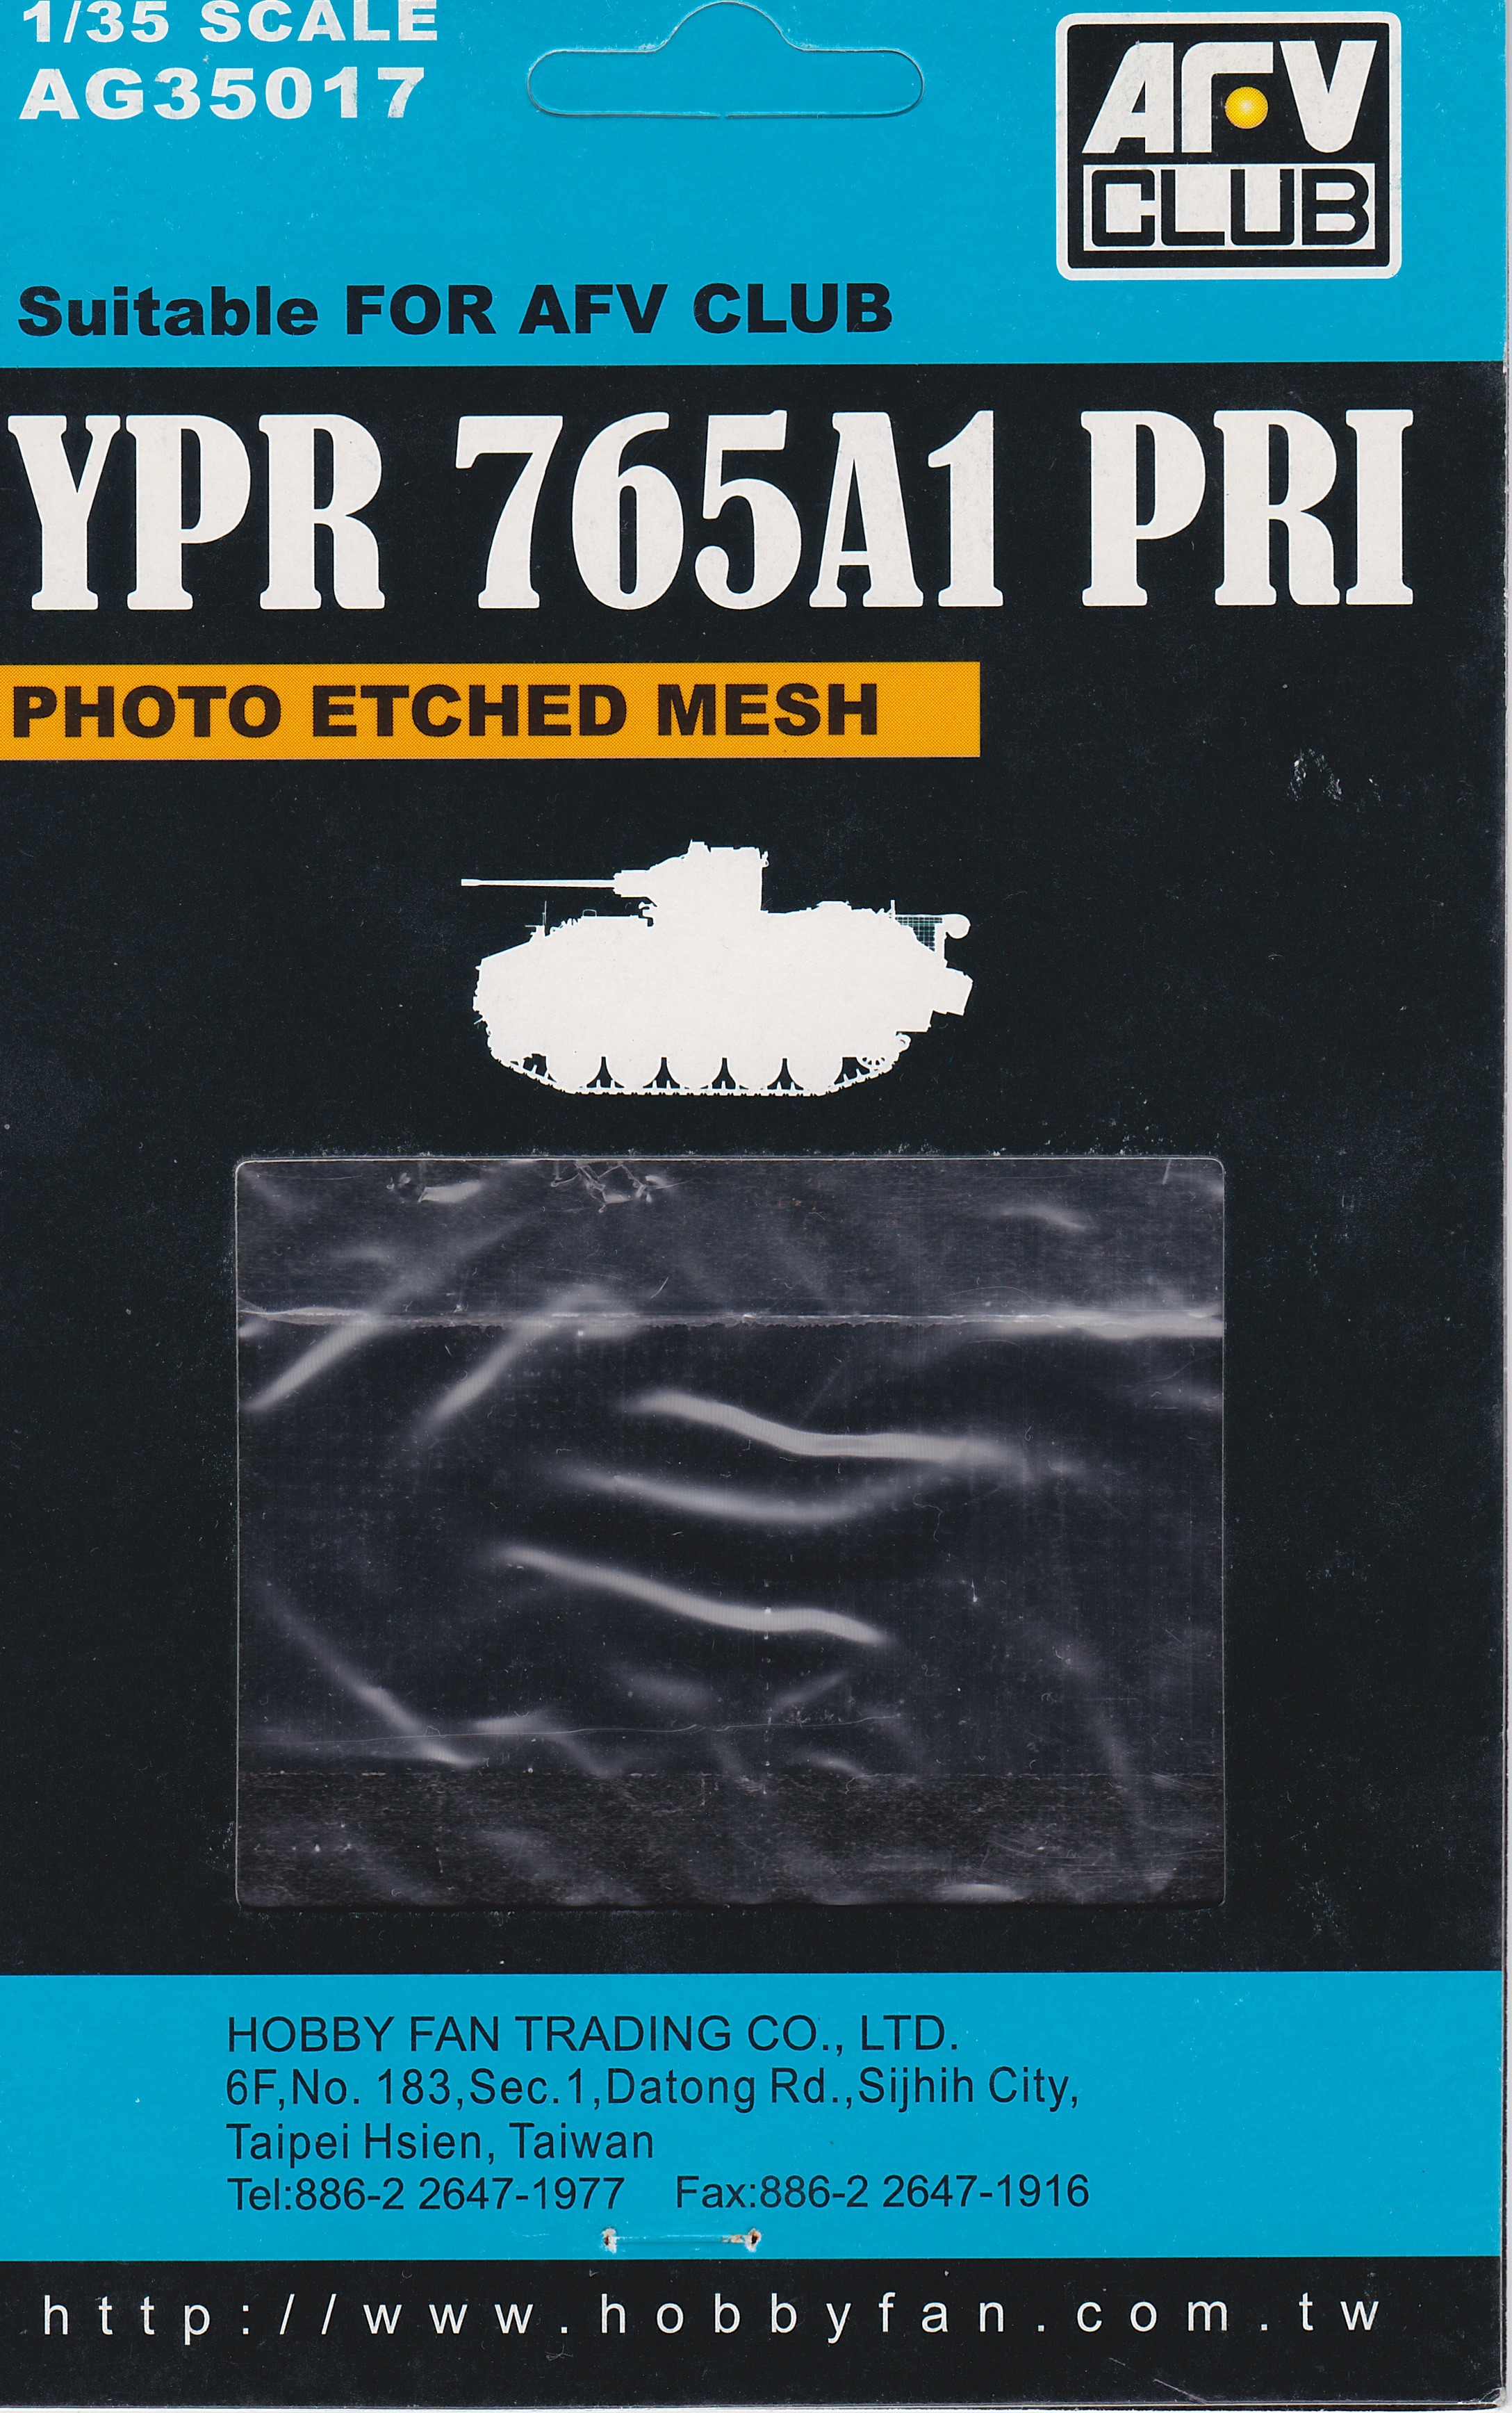 AG35017 Photo Etched Mesh for YPR765A1 PRI